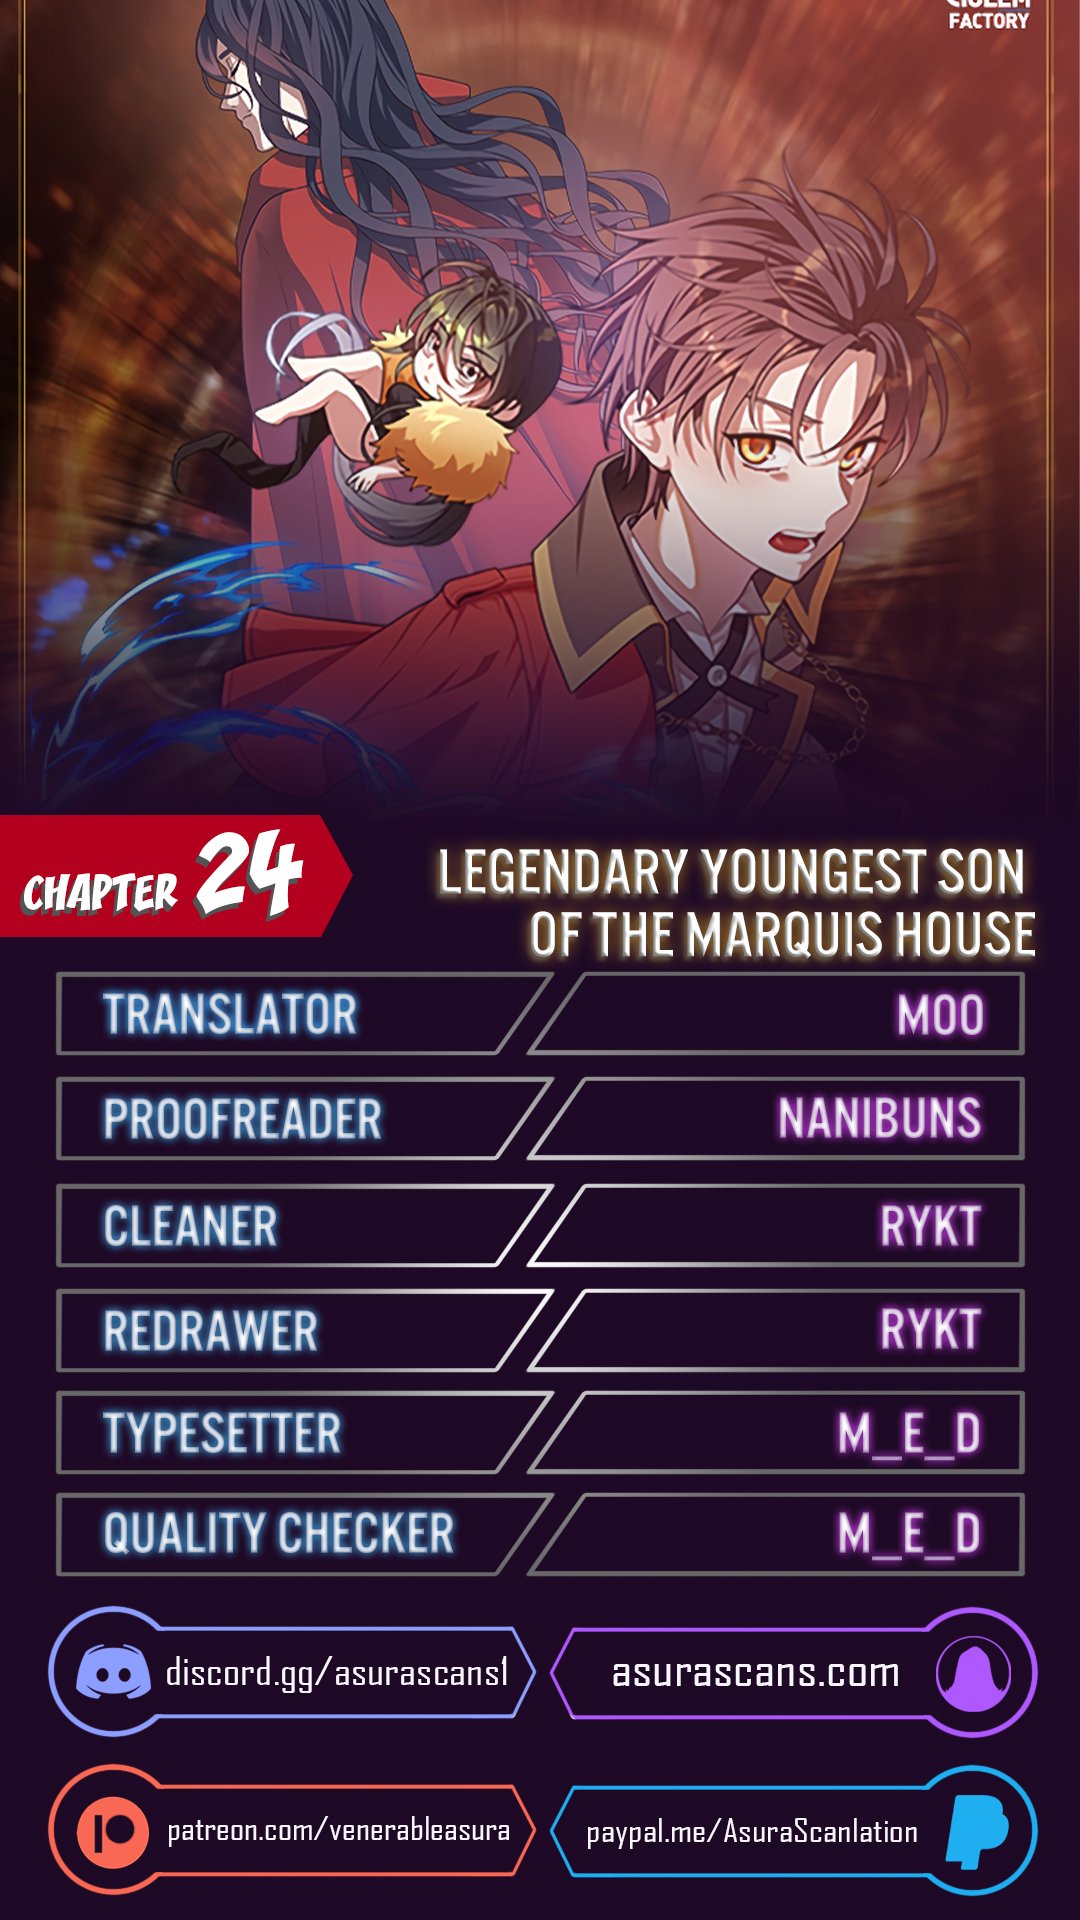 Legendary Youngest Son of the Marquis House - Chapter 18876 - Image 1